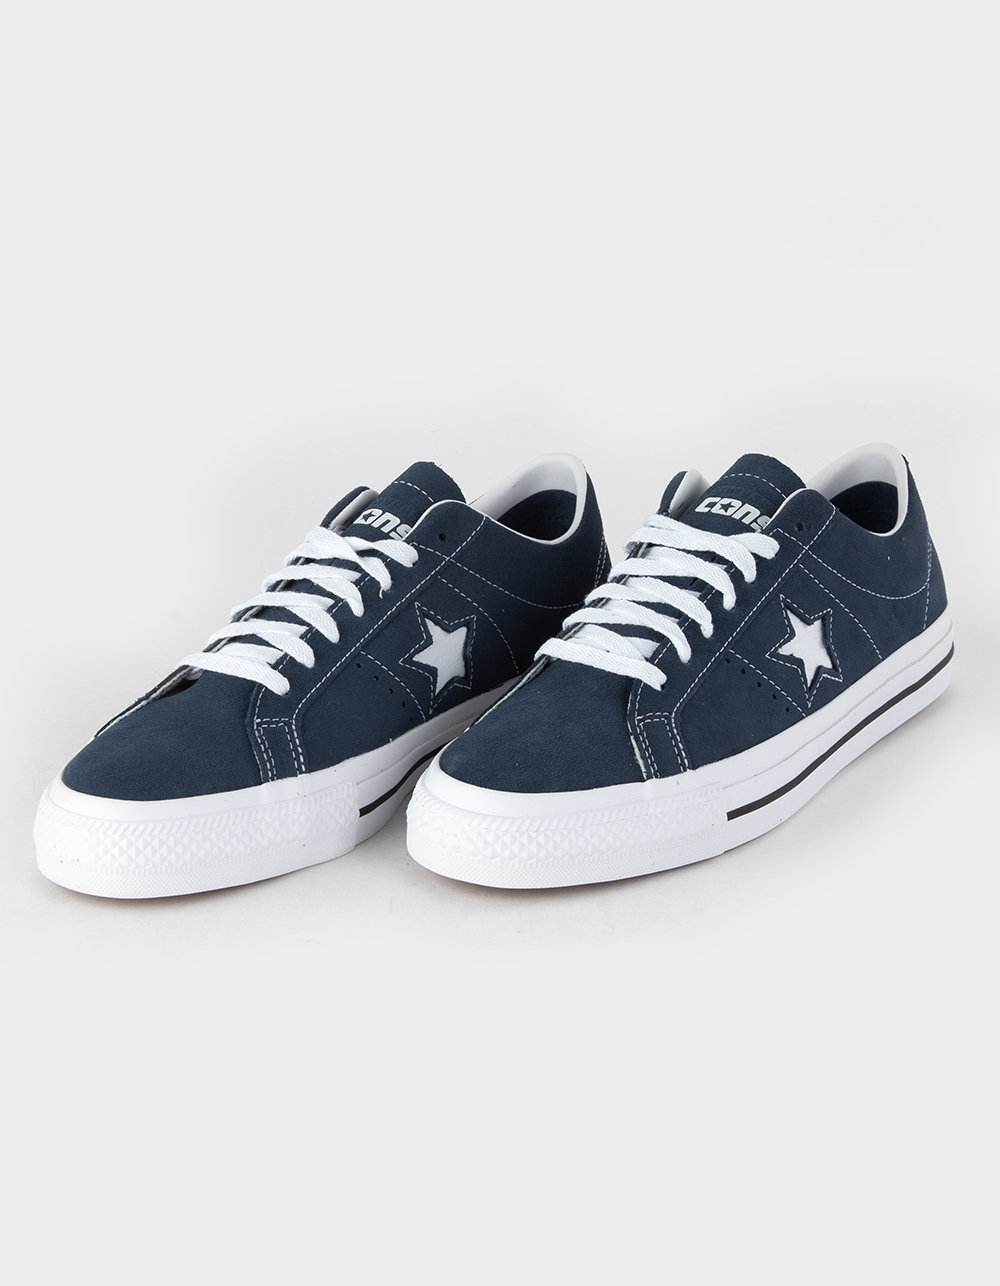 Percentage Grappig nogmaals CONVERSE One Star Pro Mens Skate Shoes - NAVY/WHITE | Tillys